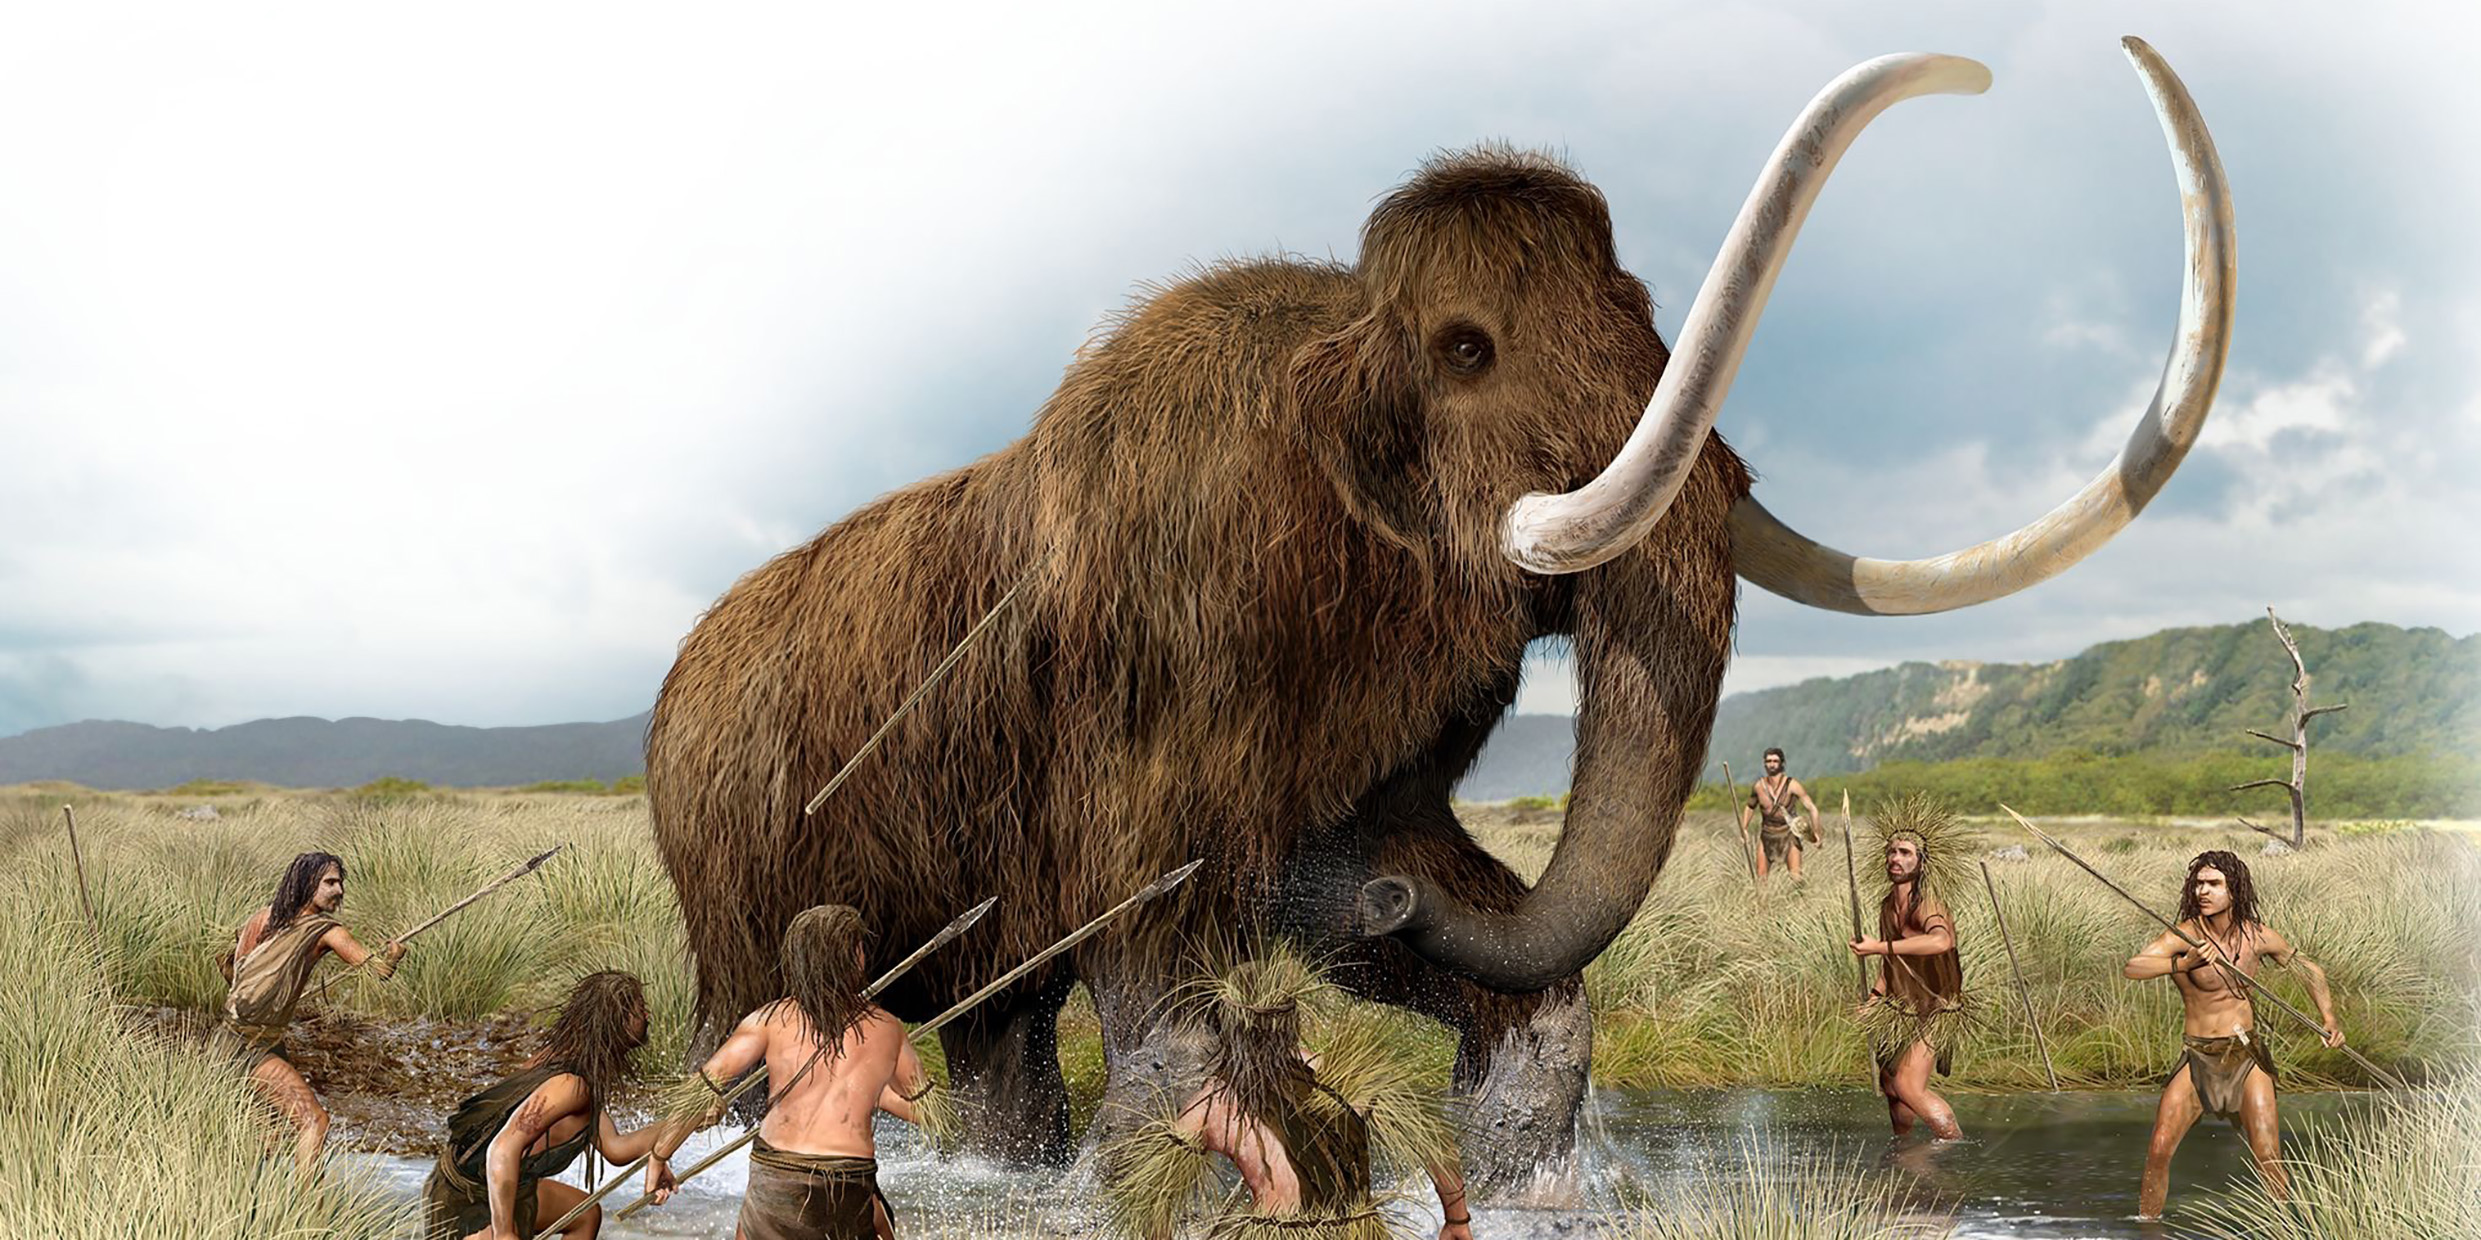 Artist's impression of hunters taking on a wooly mammoth